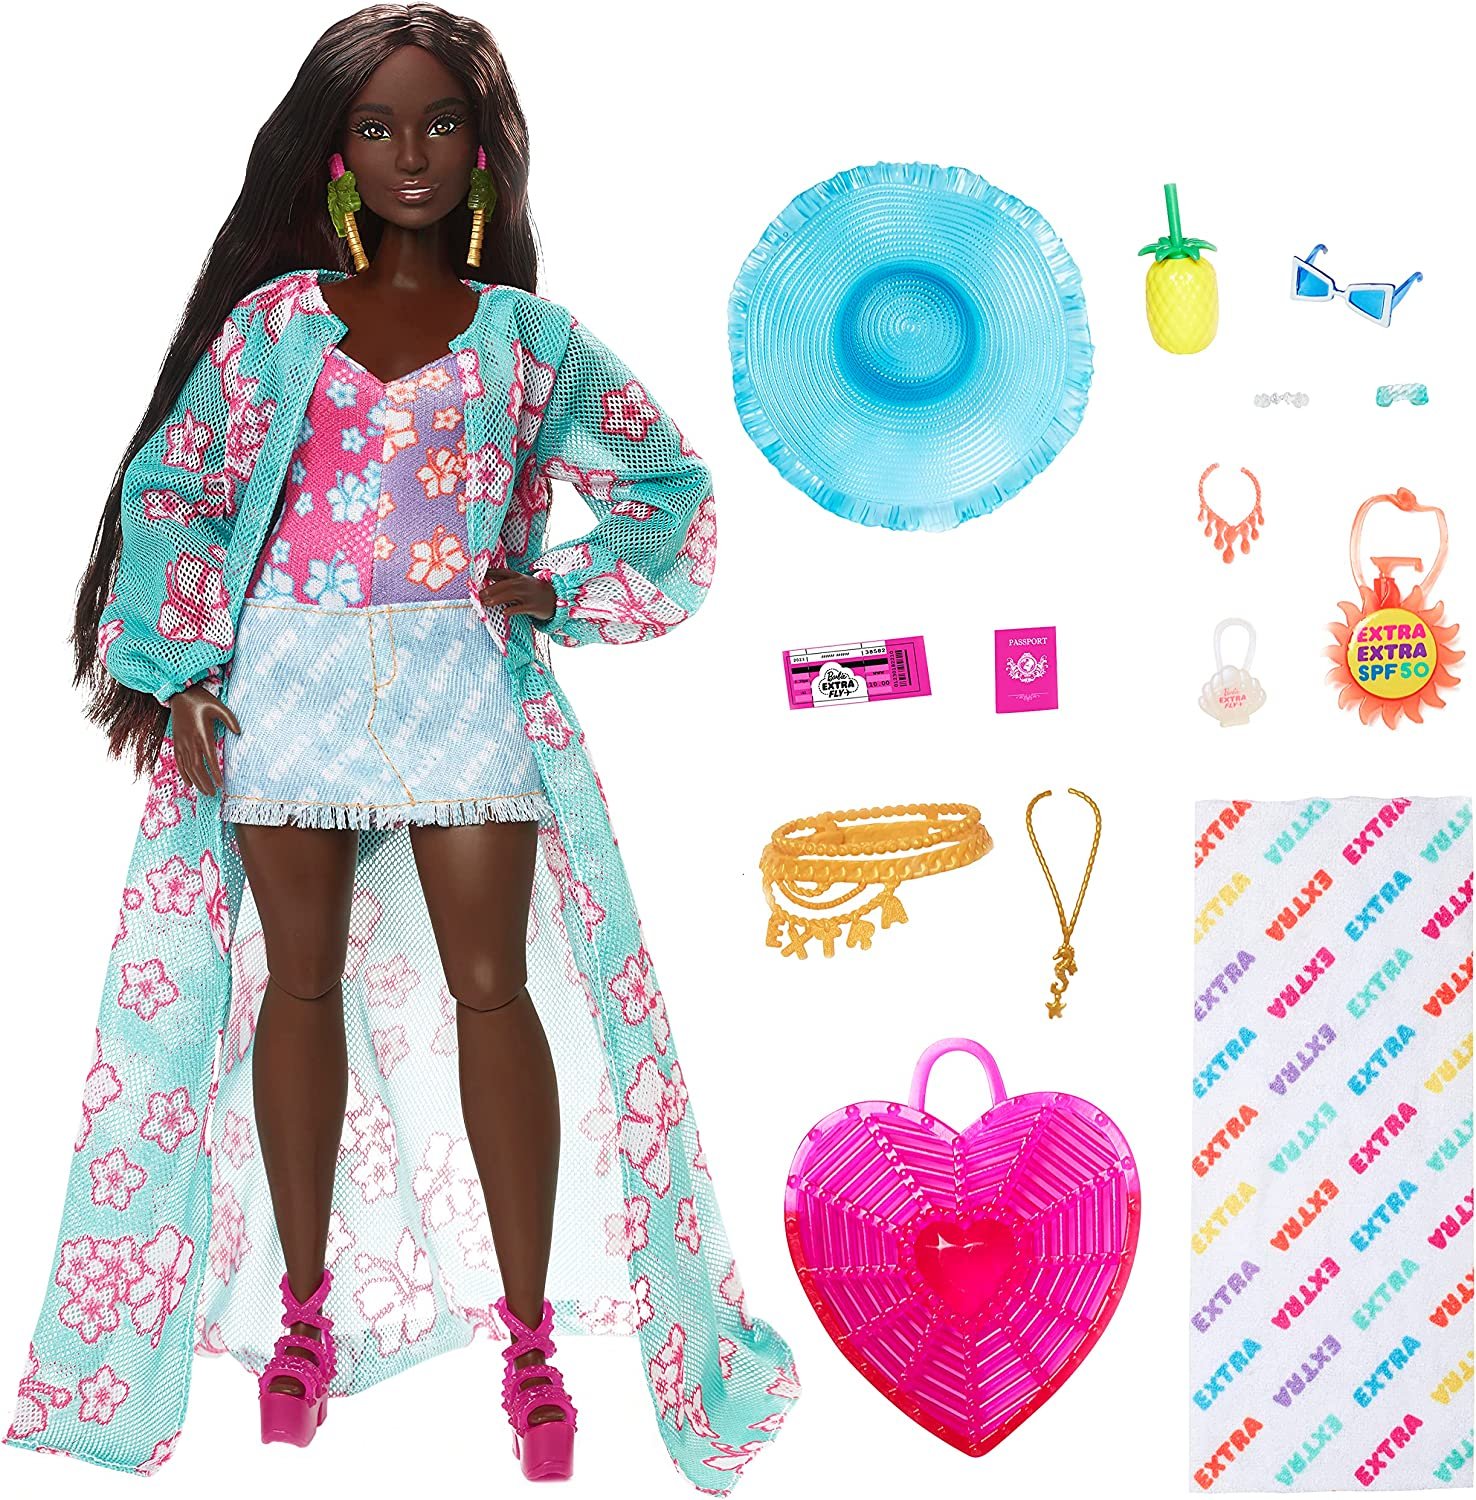 1682923837-youloveit-com-barbie-extra-fly-beach-doll13